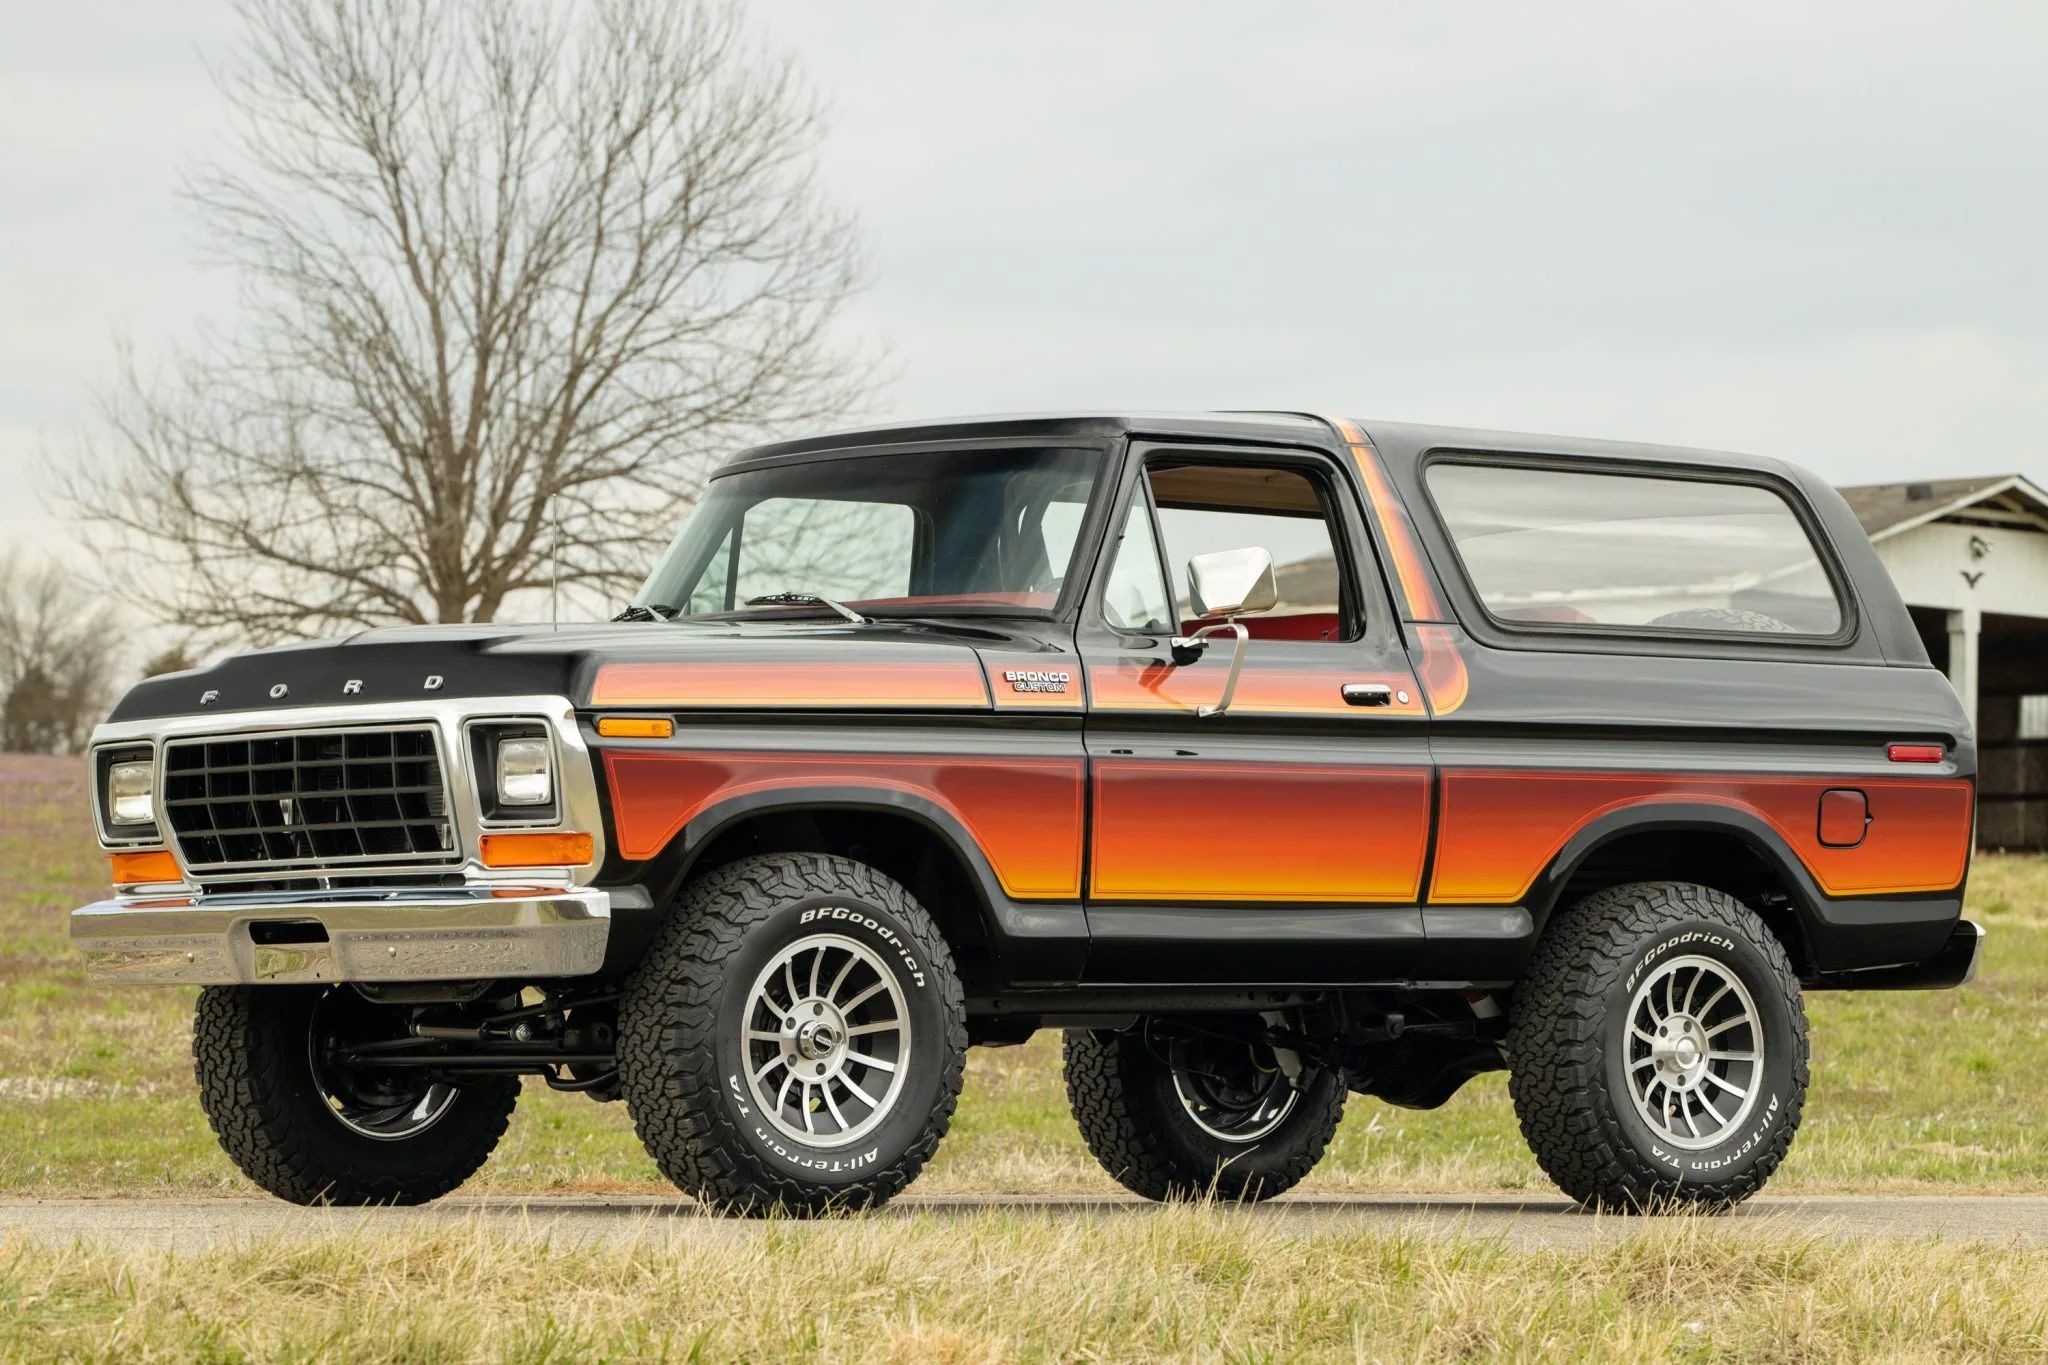 Ford Bronco History